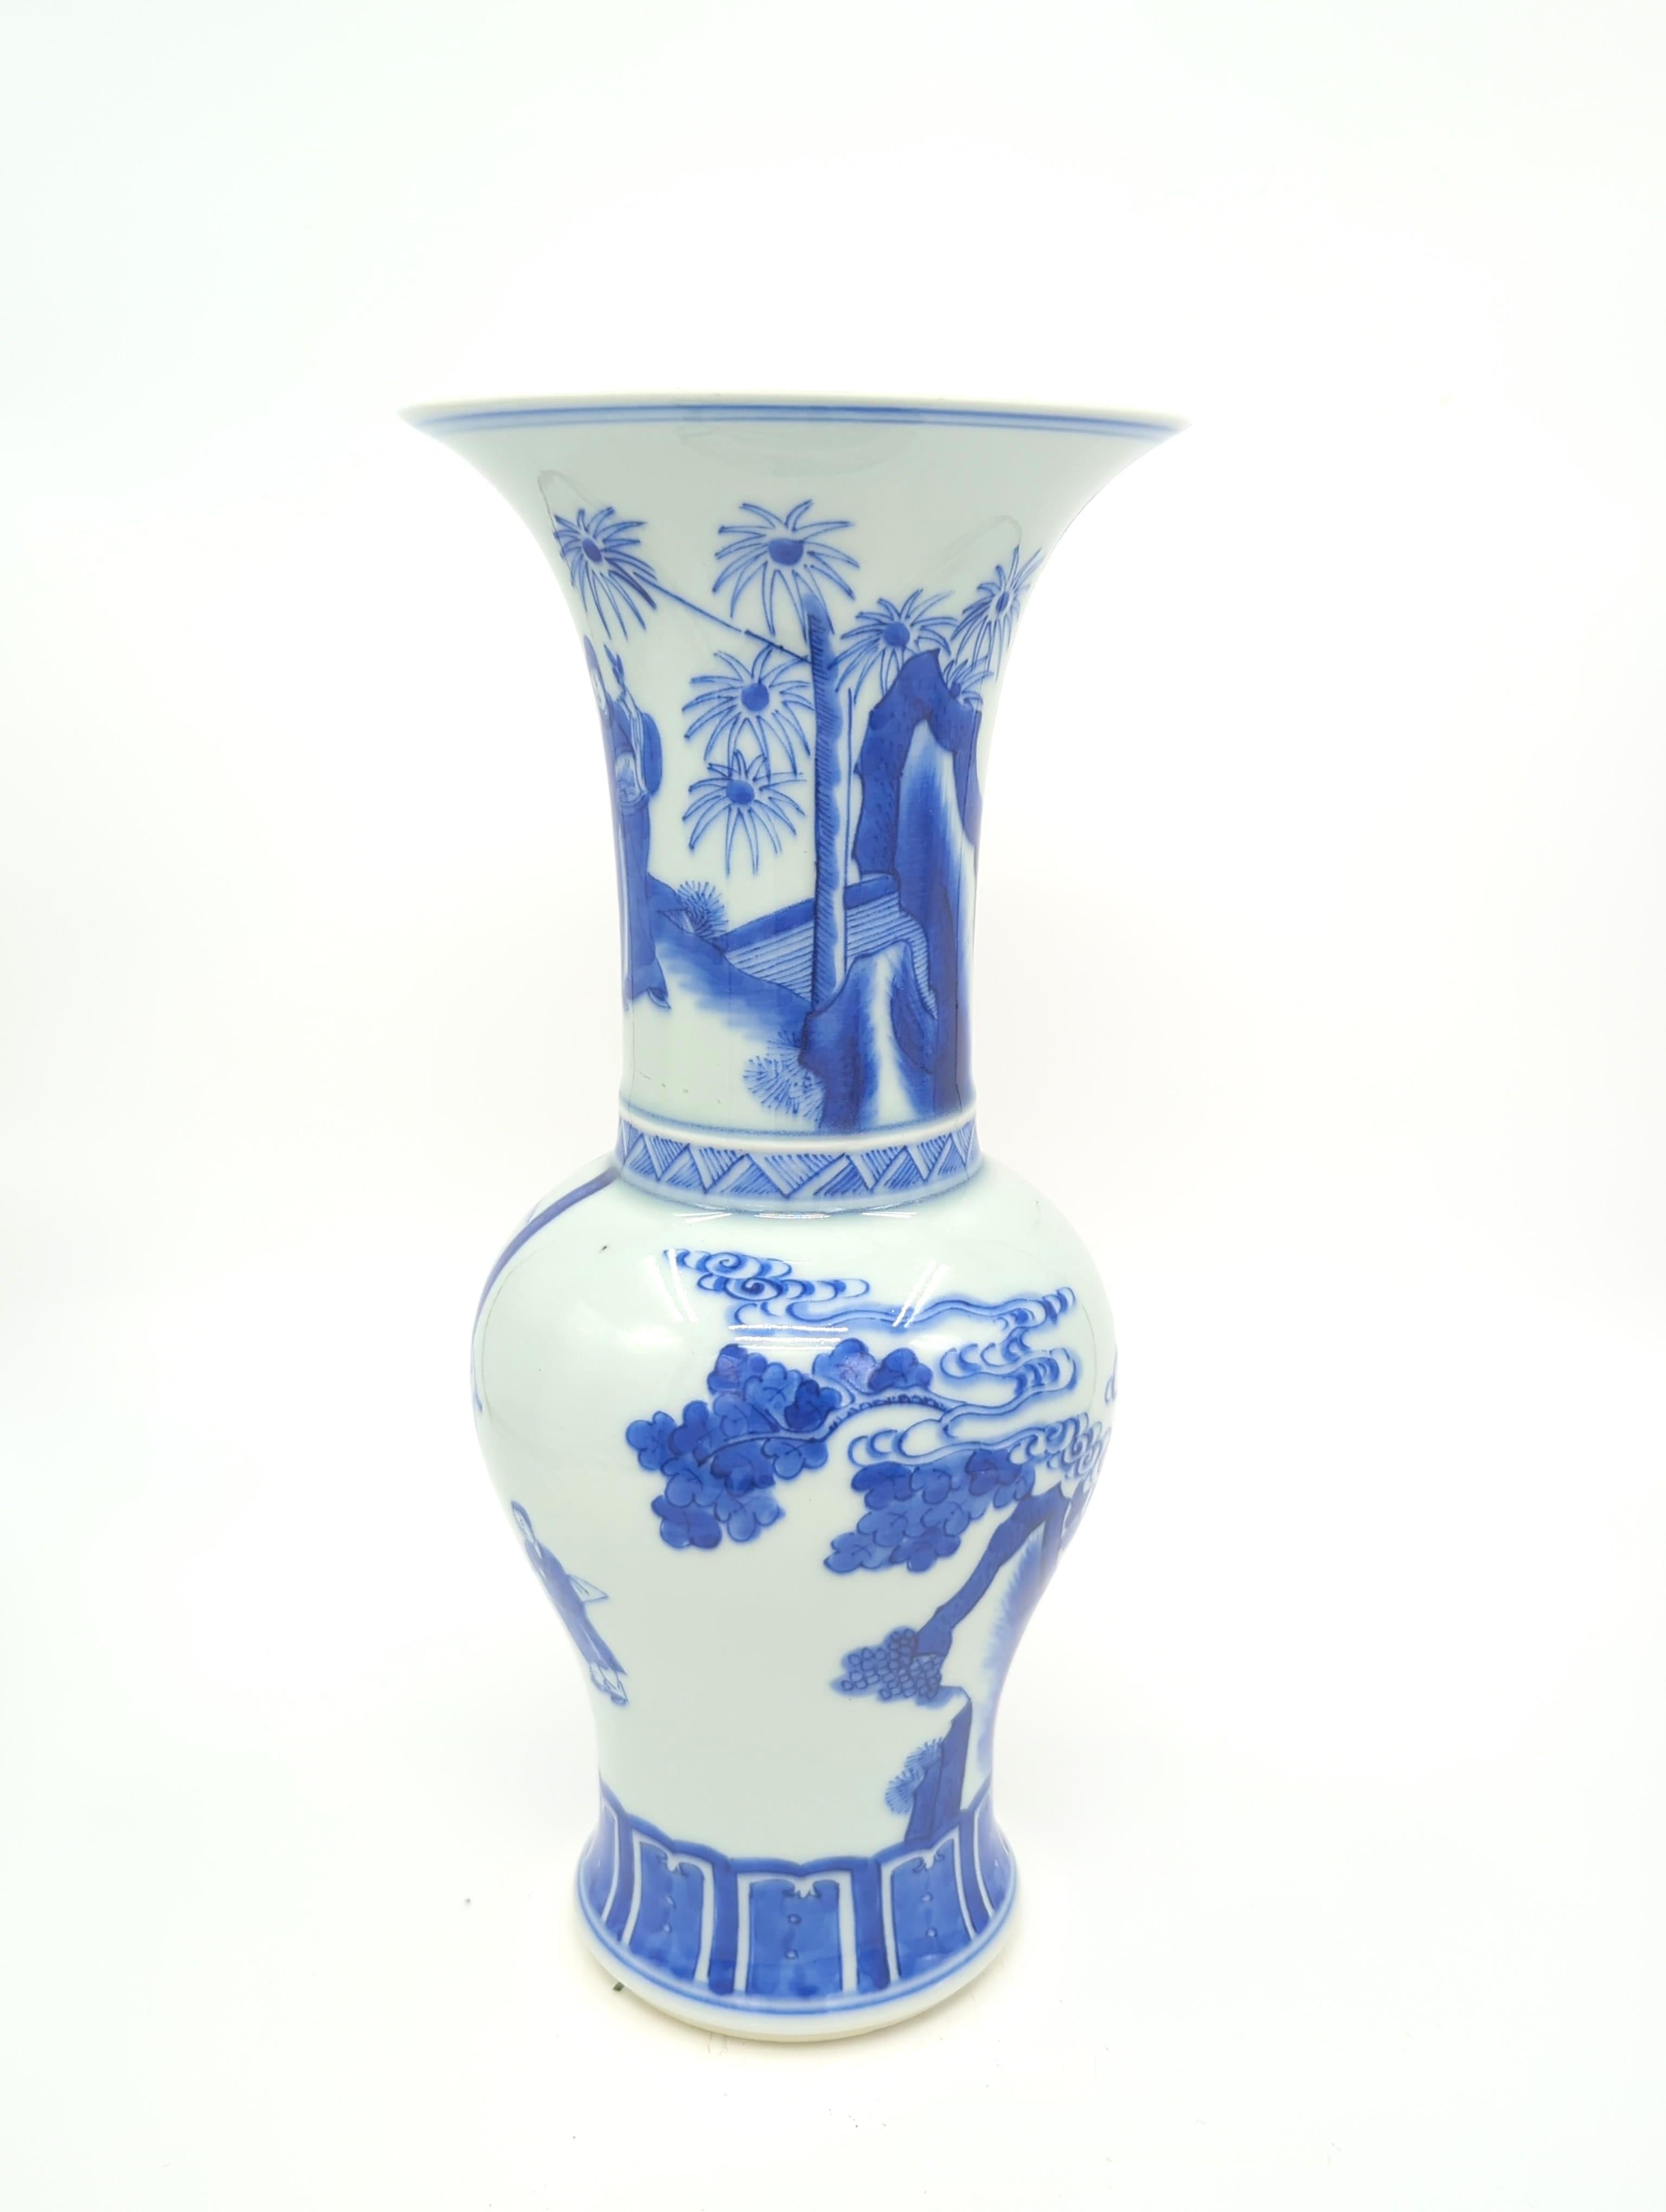 Antique Chinese Porcelain Blue & White Figural Gu Vase Late Qing R.O.C. 19/20c For Sale 6